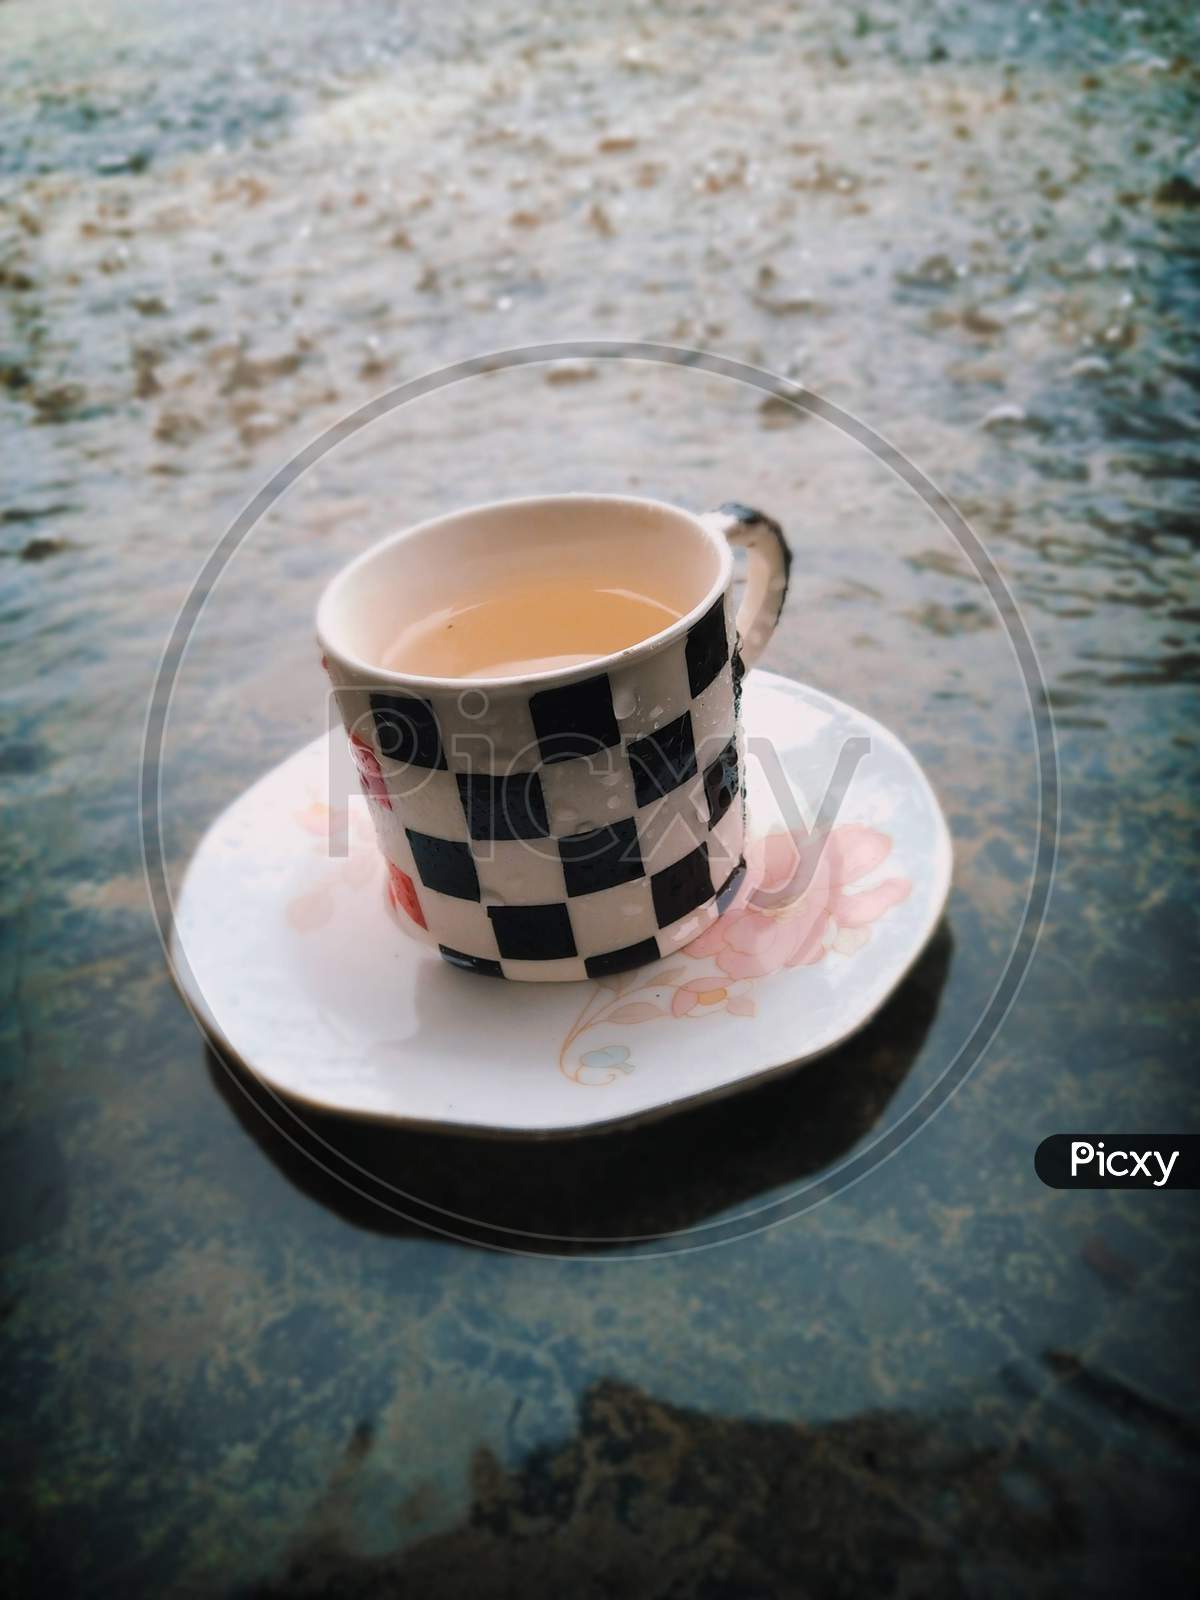 A cup of hot masala tea with rainy background.